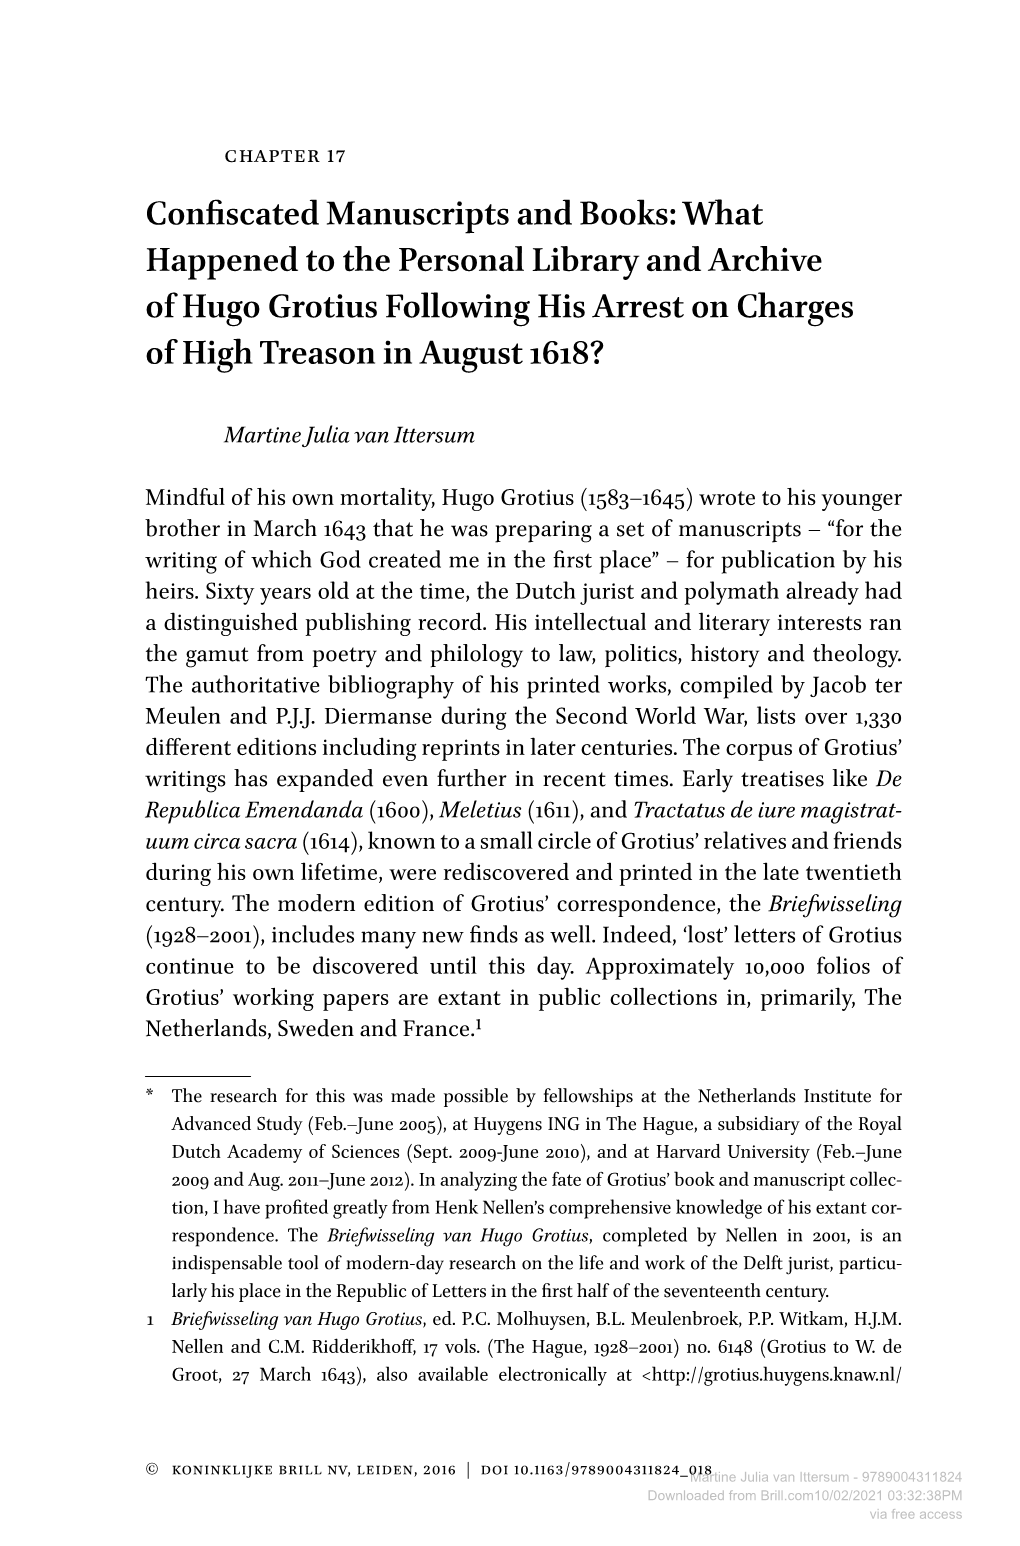 What Happened to the Personal Library and Archive of Hugo Grotius Following His Arrest on Charges of High Treason in August 1618?